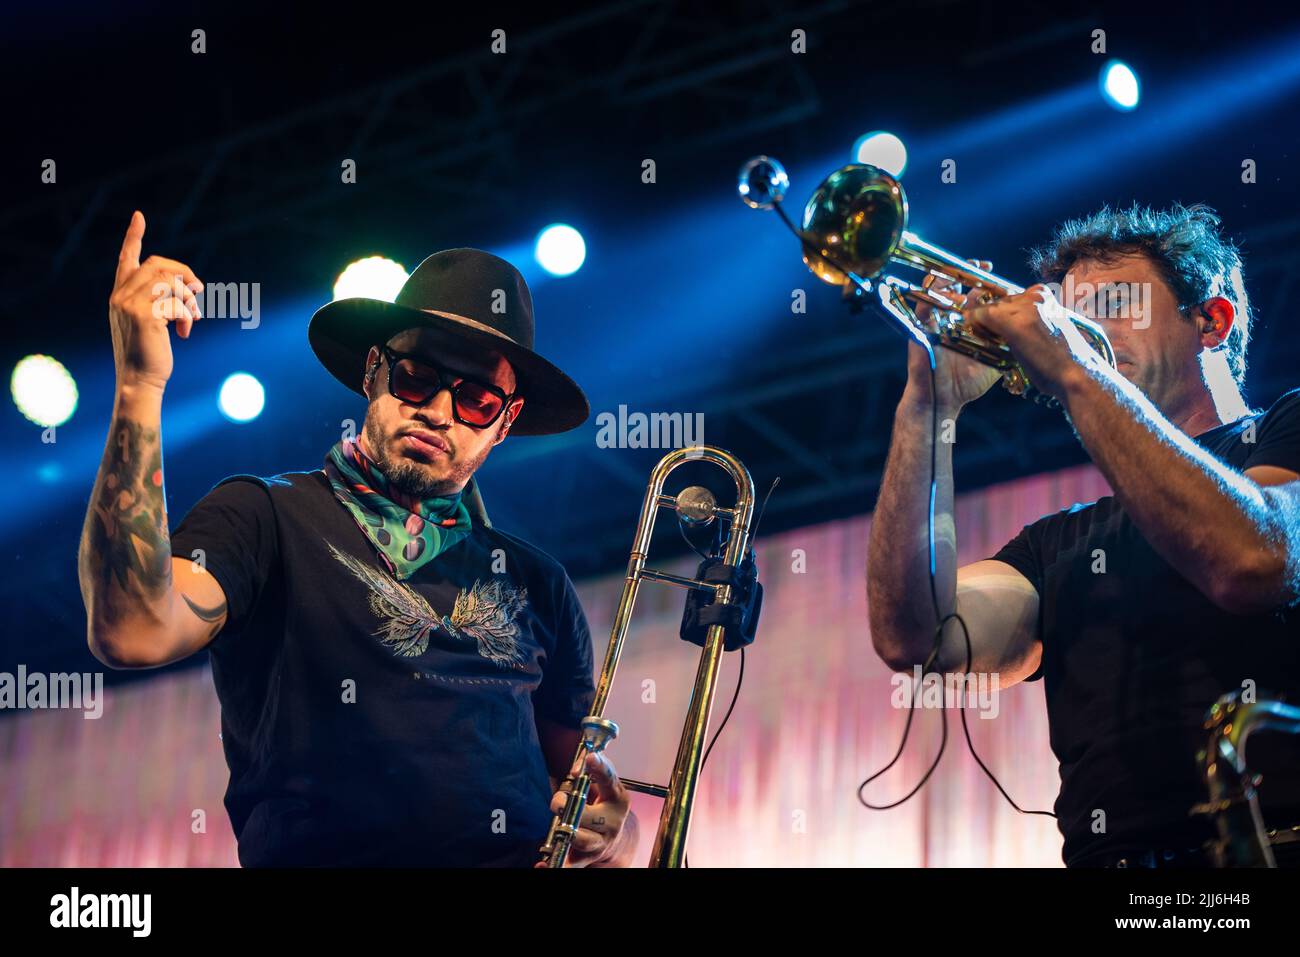 Denis Silveira waves the crowd while Martin Gil perform a trumpet solo during No Te Va a Gustar show in Corrientes, Argentina. Stock Photo